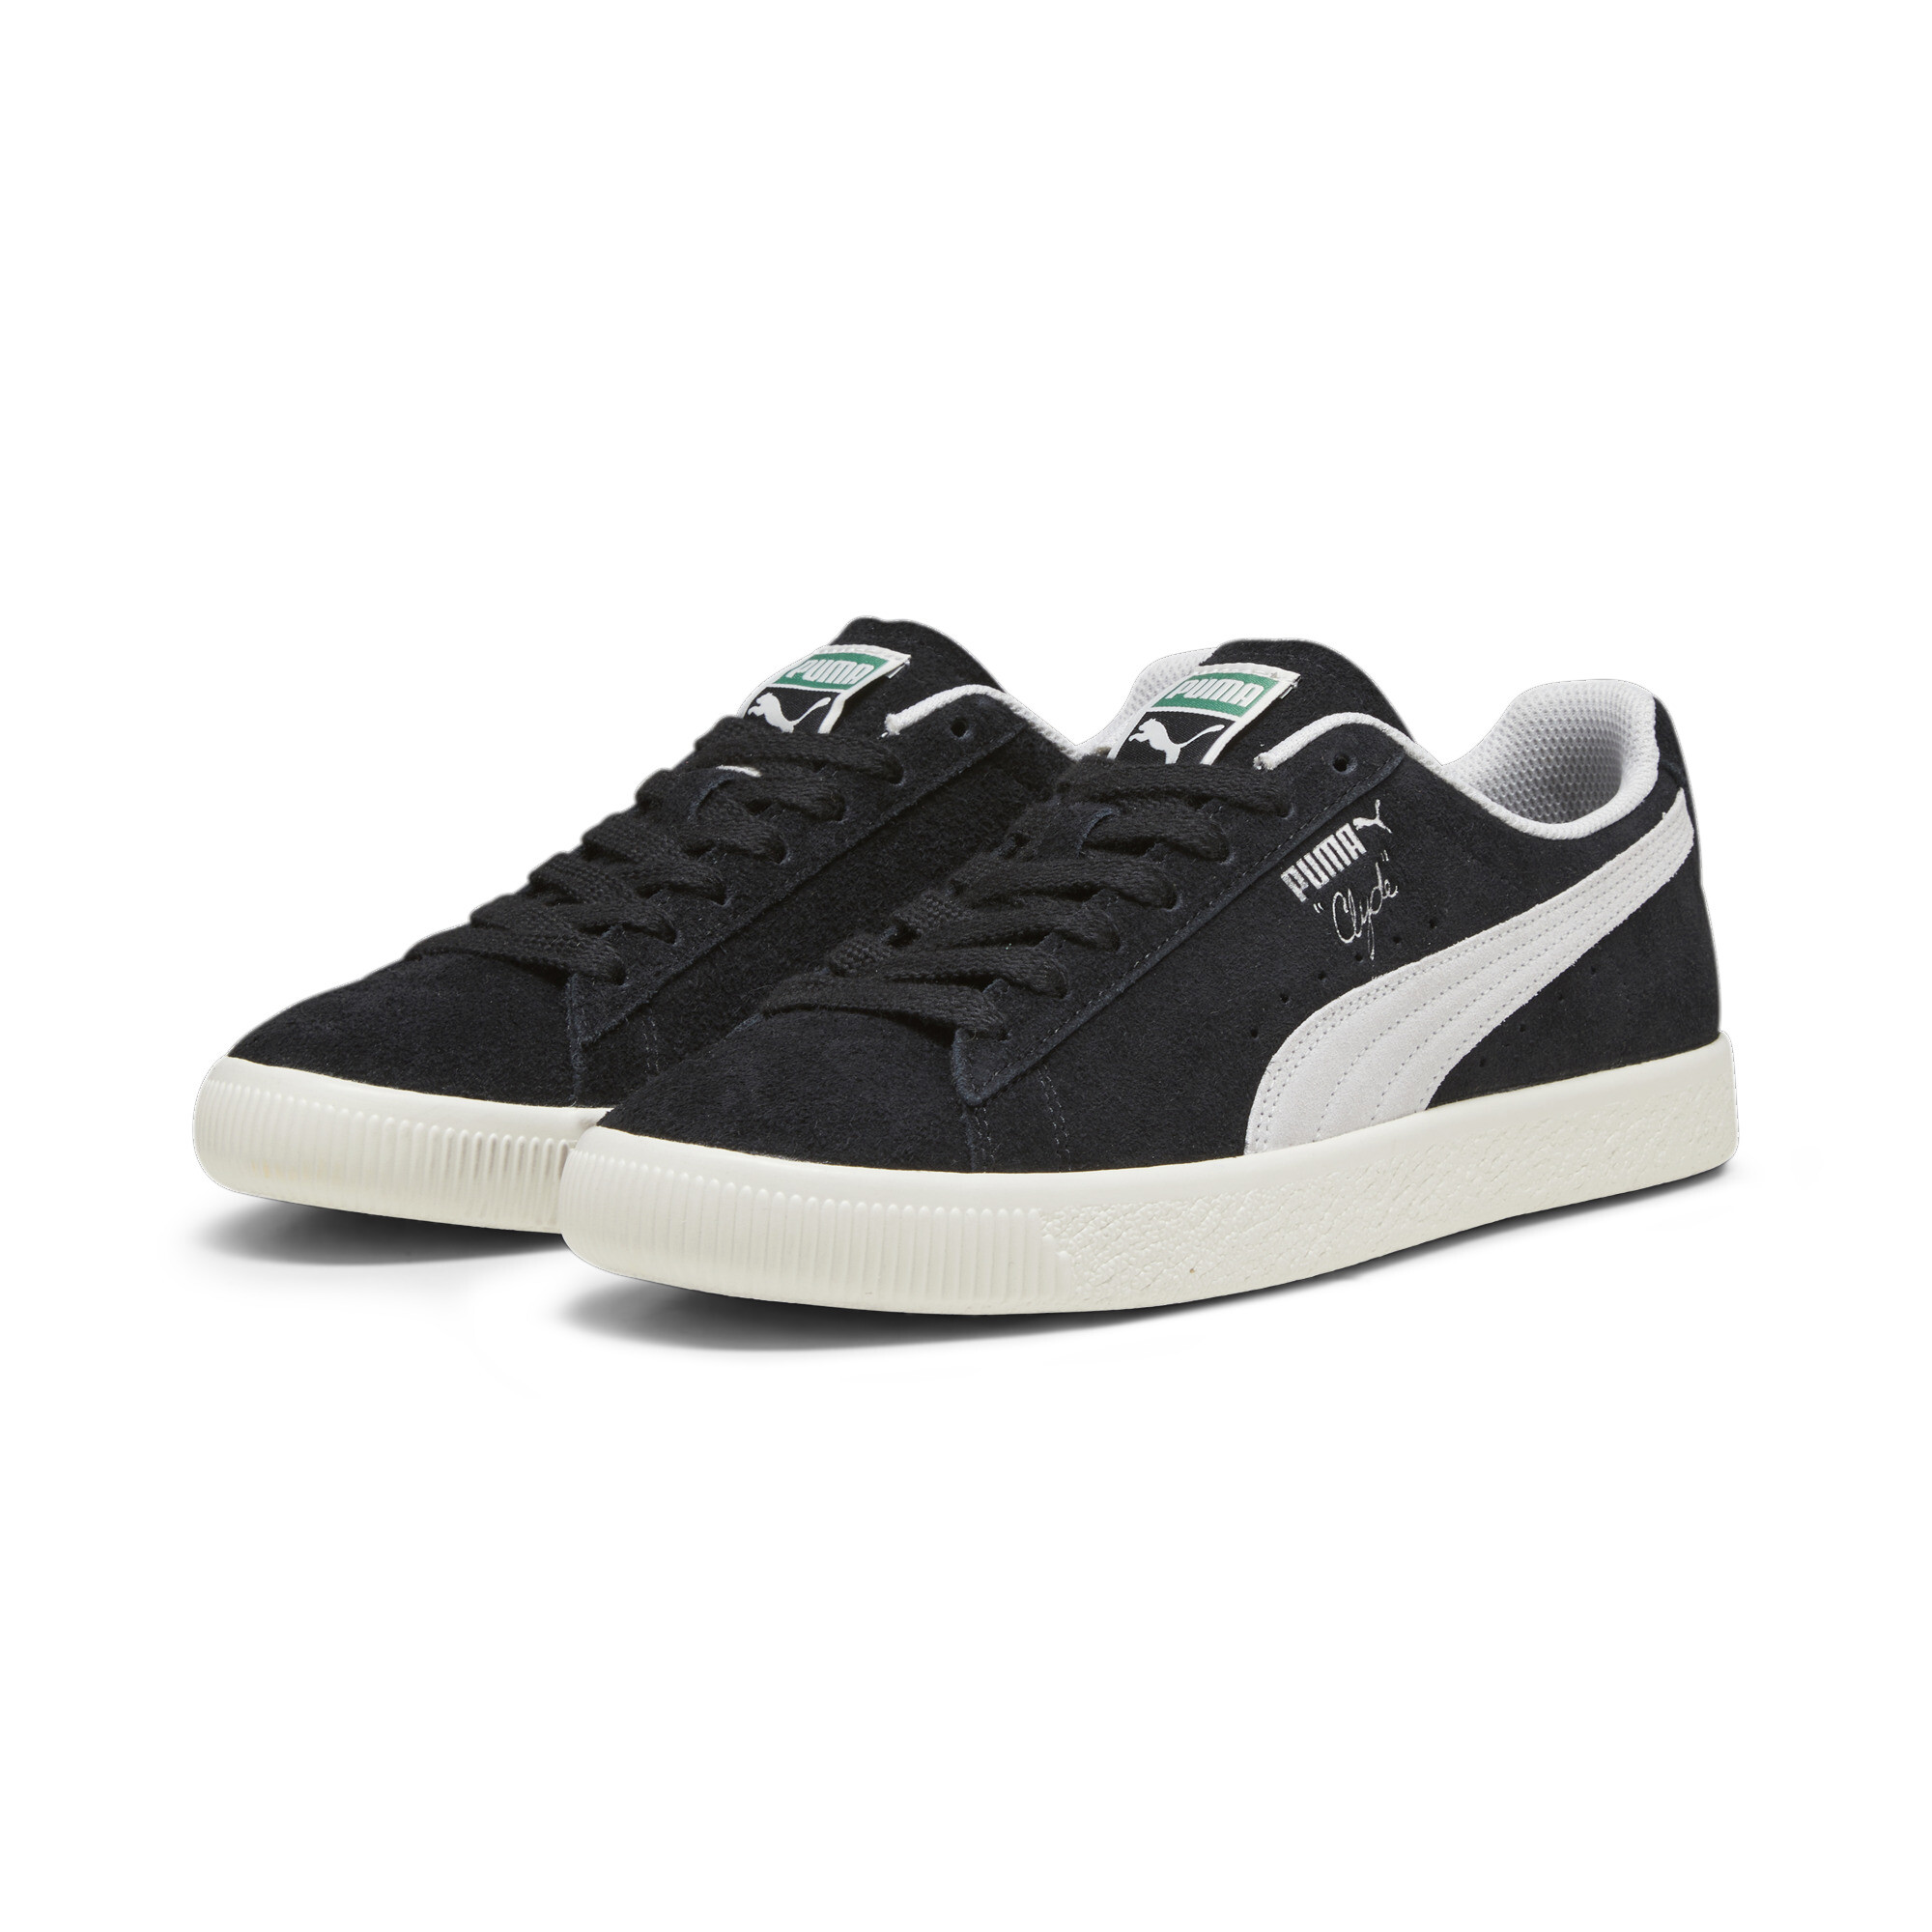 Men's PUMA Clyde Hairy Suede Sneakers In 10 - Black, Size EU 42